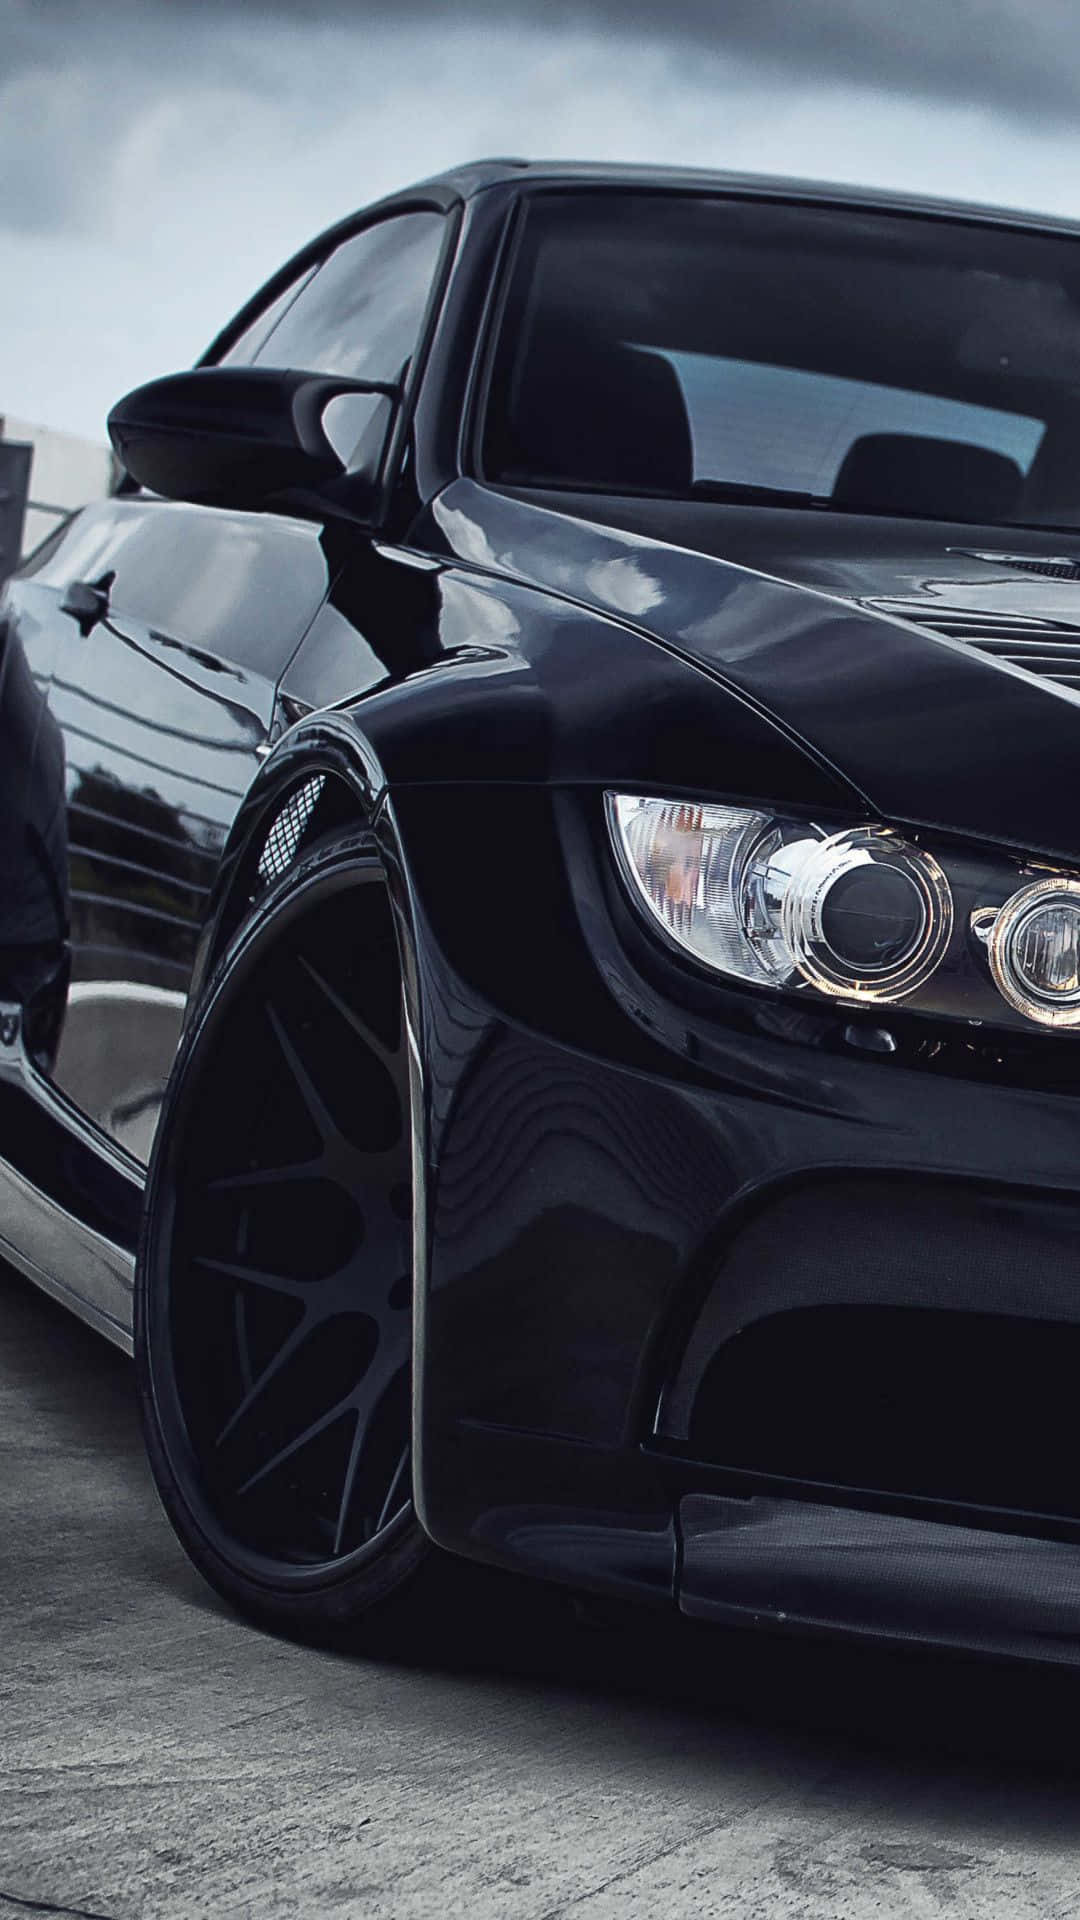 Enjoy Unrivaled Tech and Style With the BMW iPhone Wallpaper